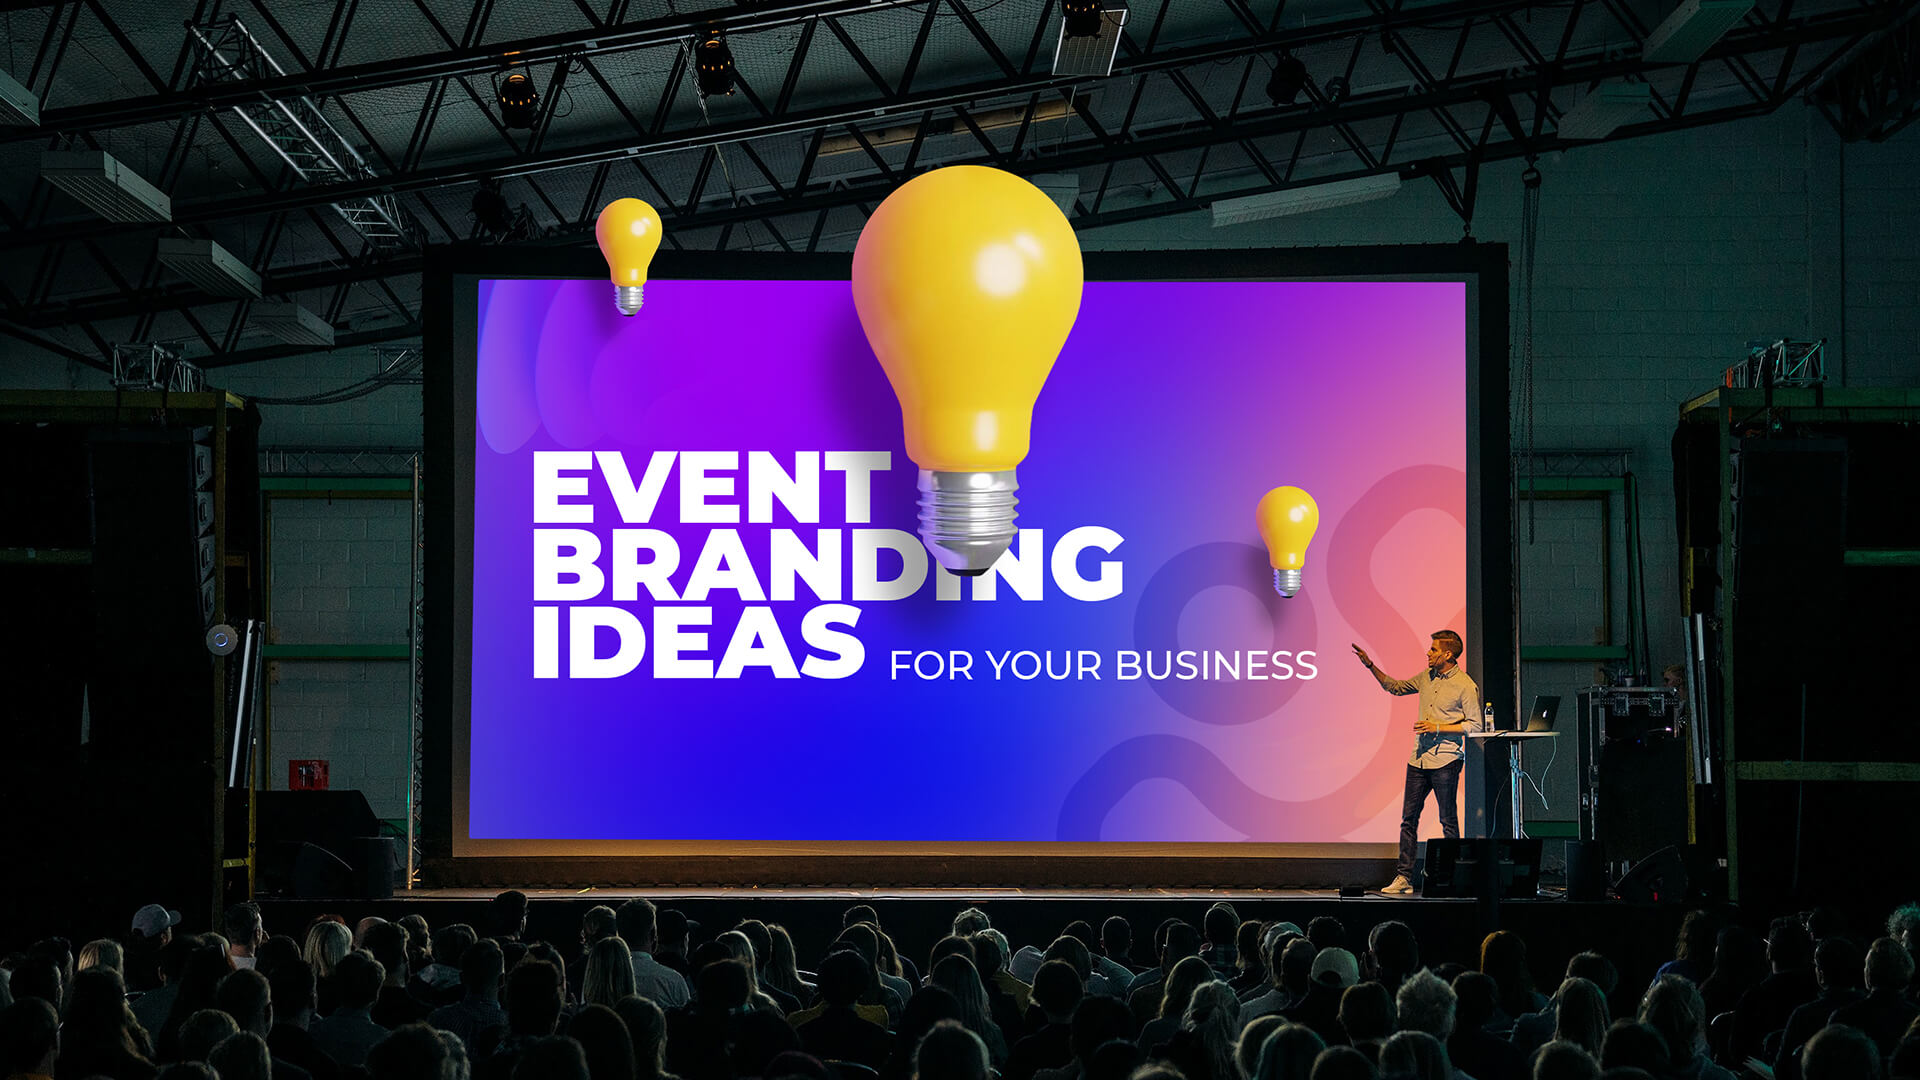 Event branding ideas for your business